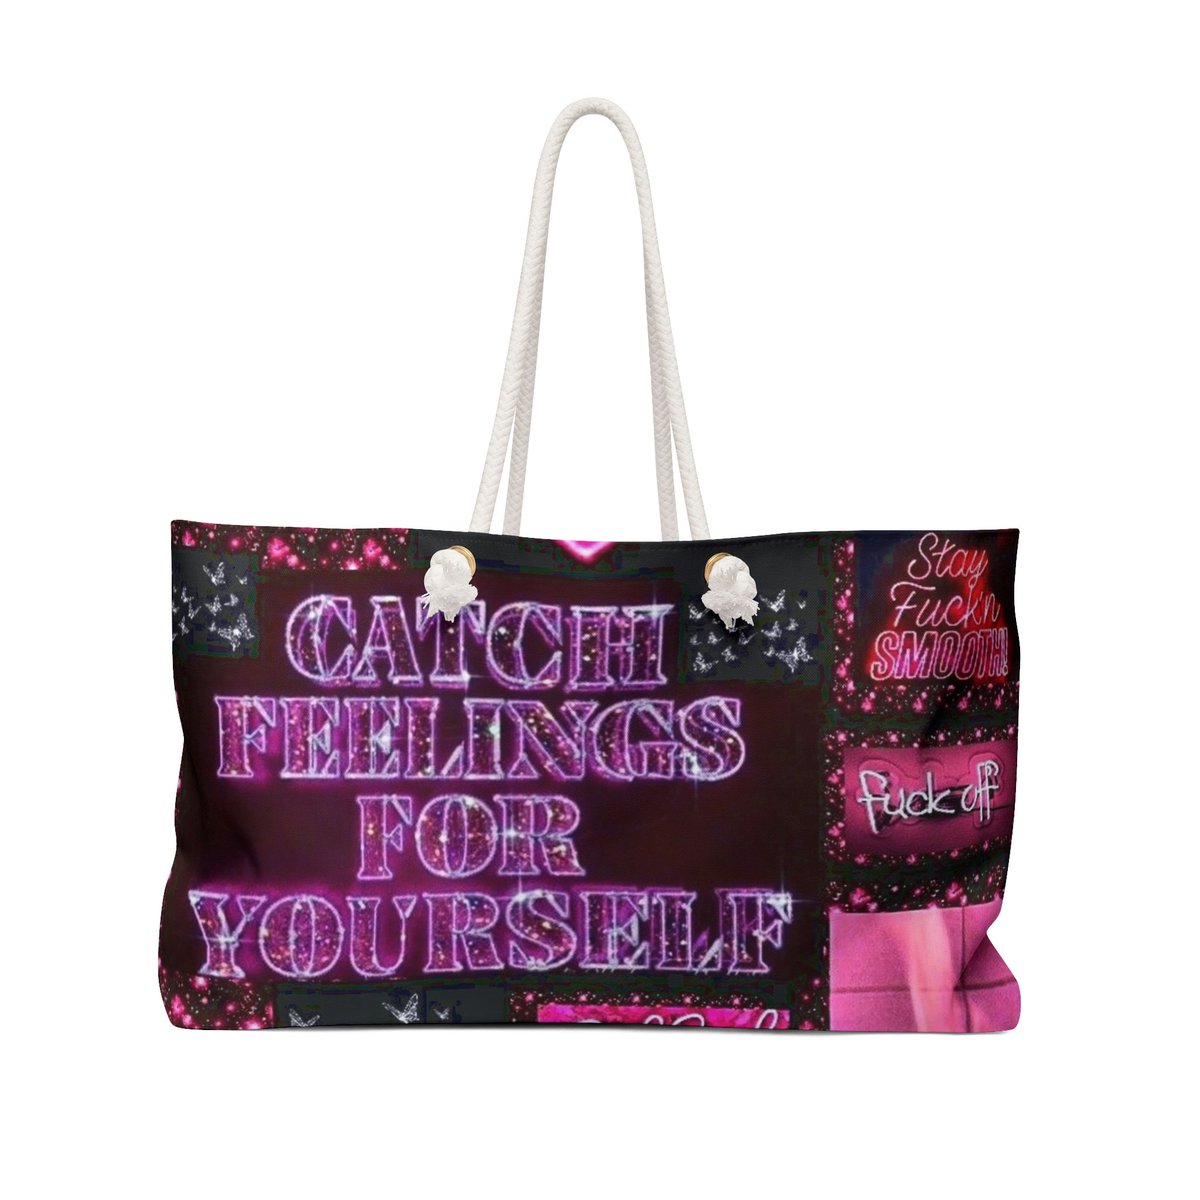 Excited to share the latest addition to my #etsy shop: Pretty Girl Weekender Bag etsy.me/3AopUVV #pink #totebag #girlytotebag #baddiebag #overnightbag #weekendbag #pinkaestheticbag #largeweekendbag #pinktotebag